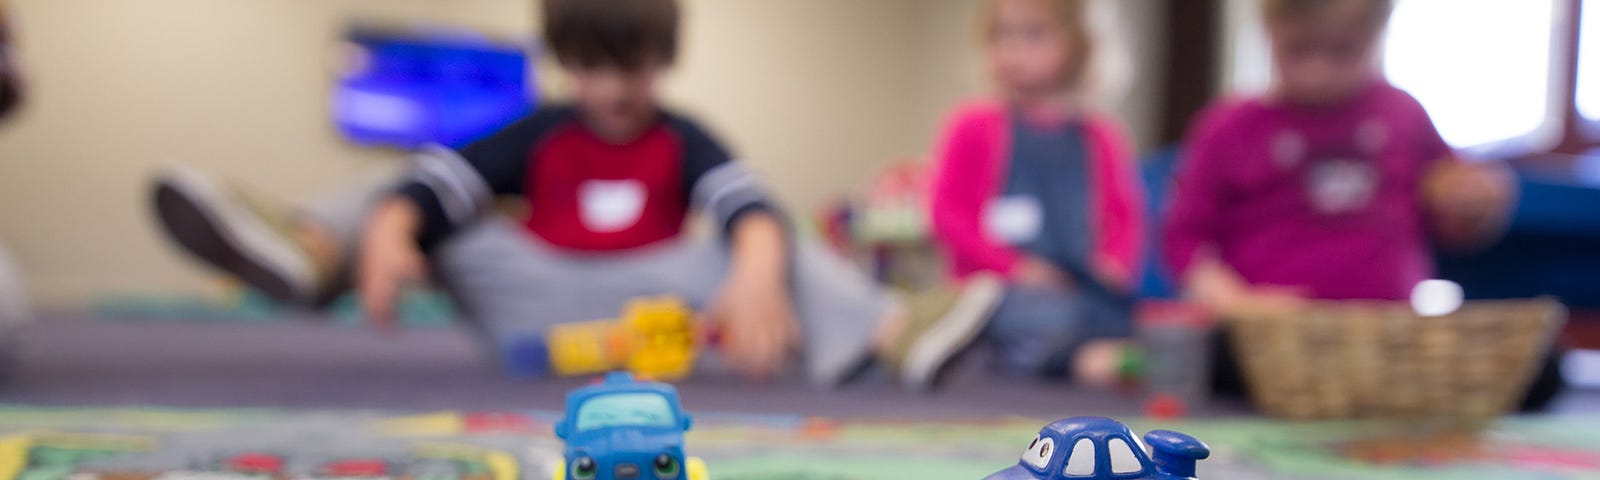 Three small children at daycare sitting on a rug playing with cars.